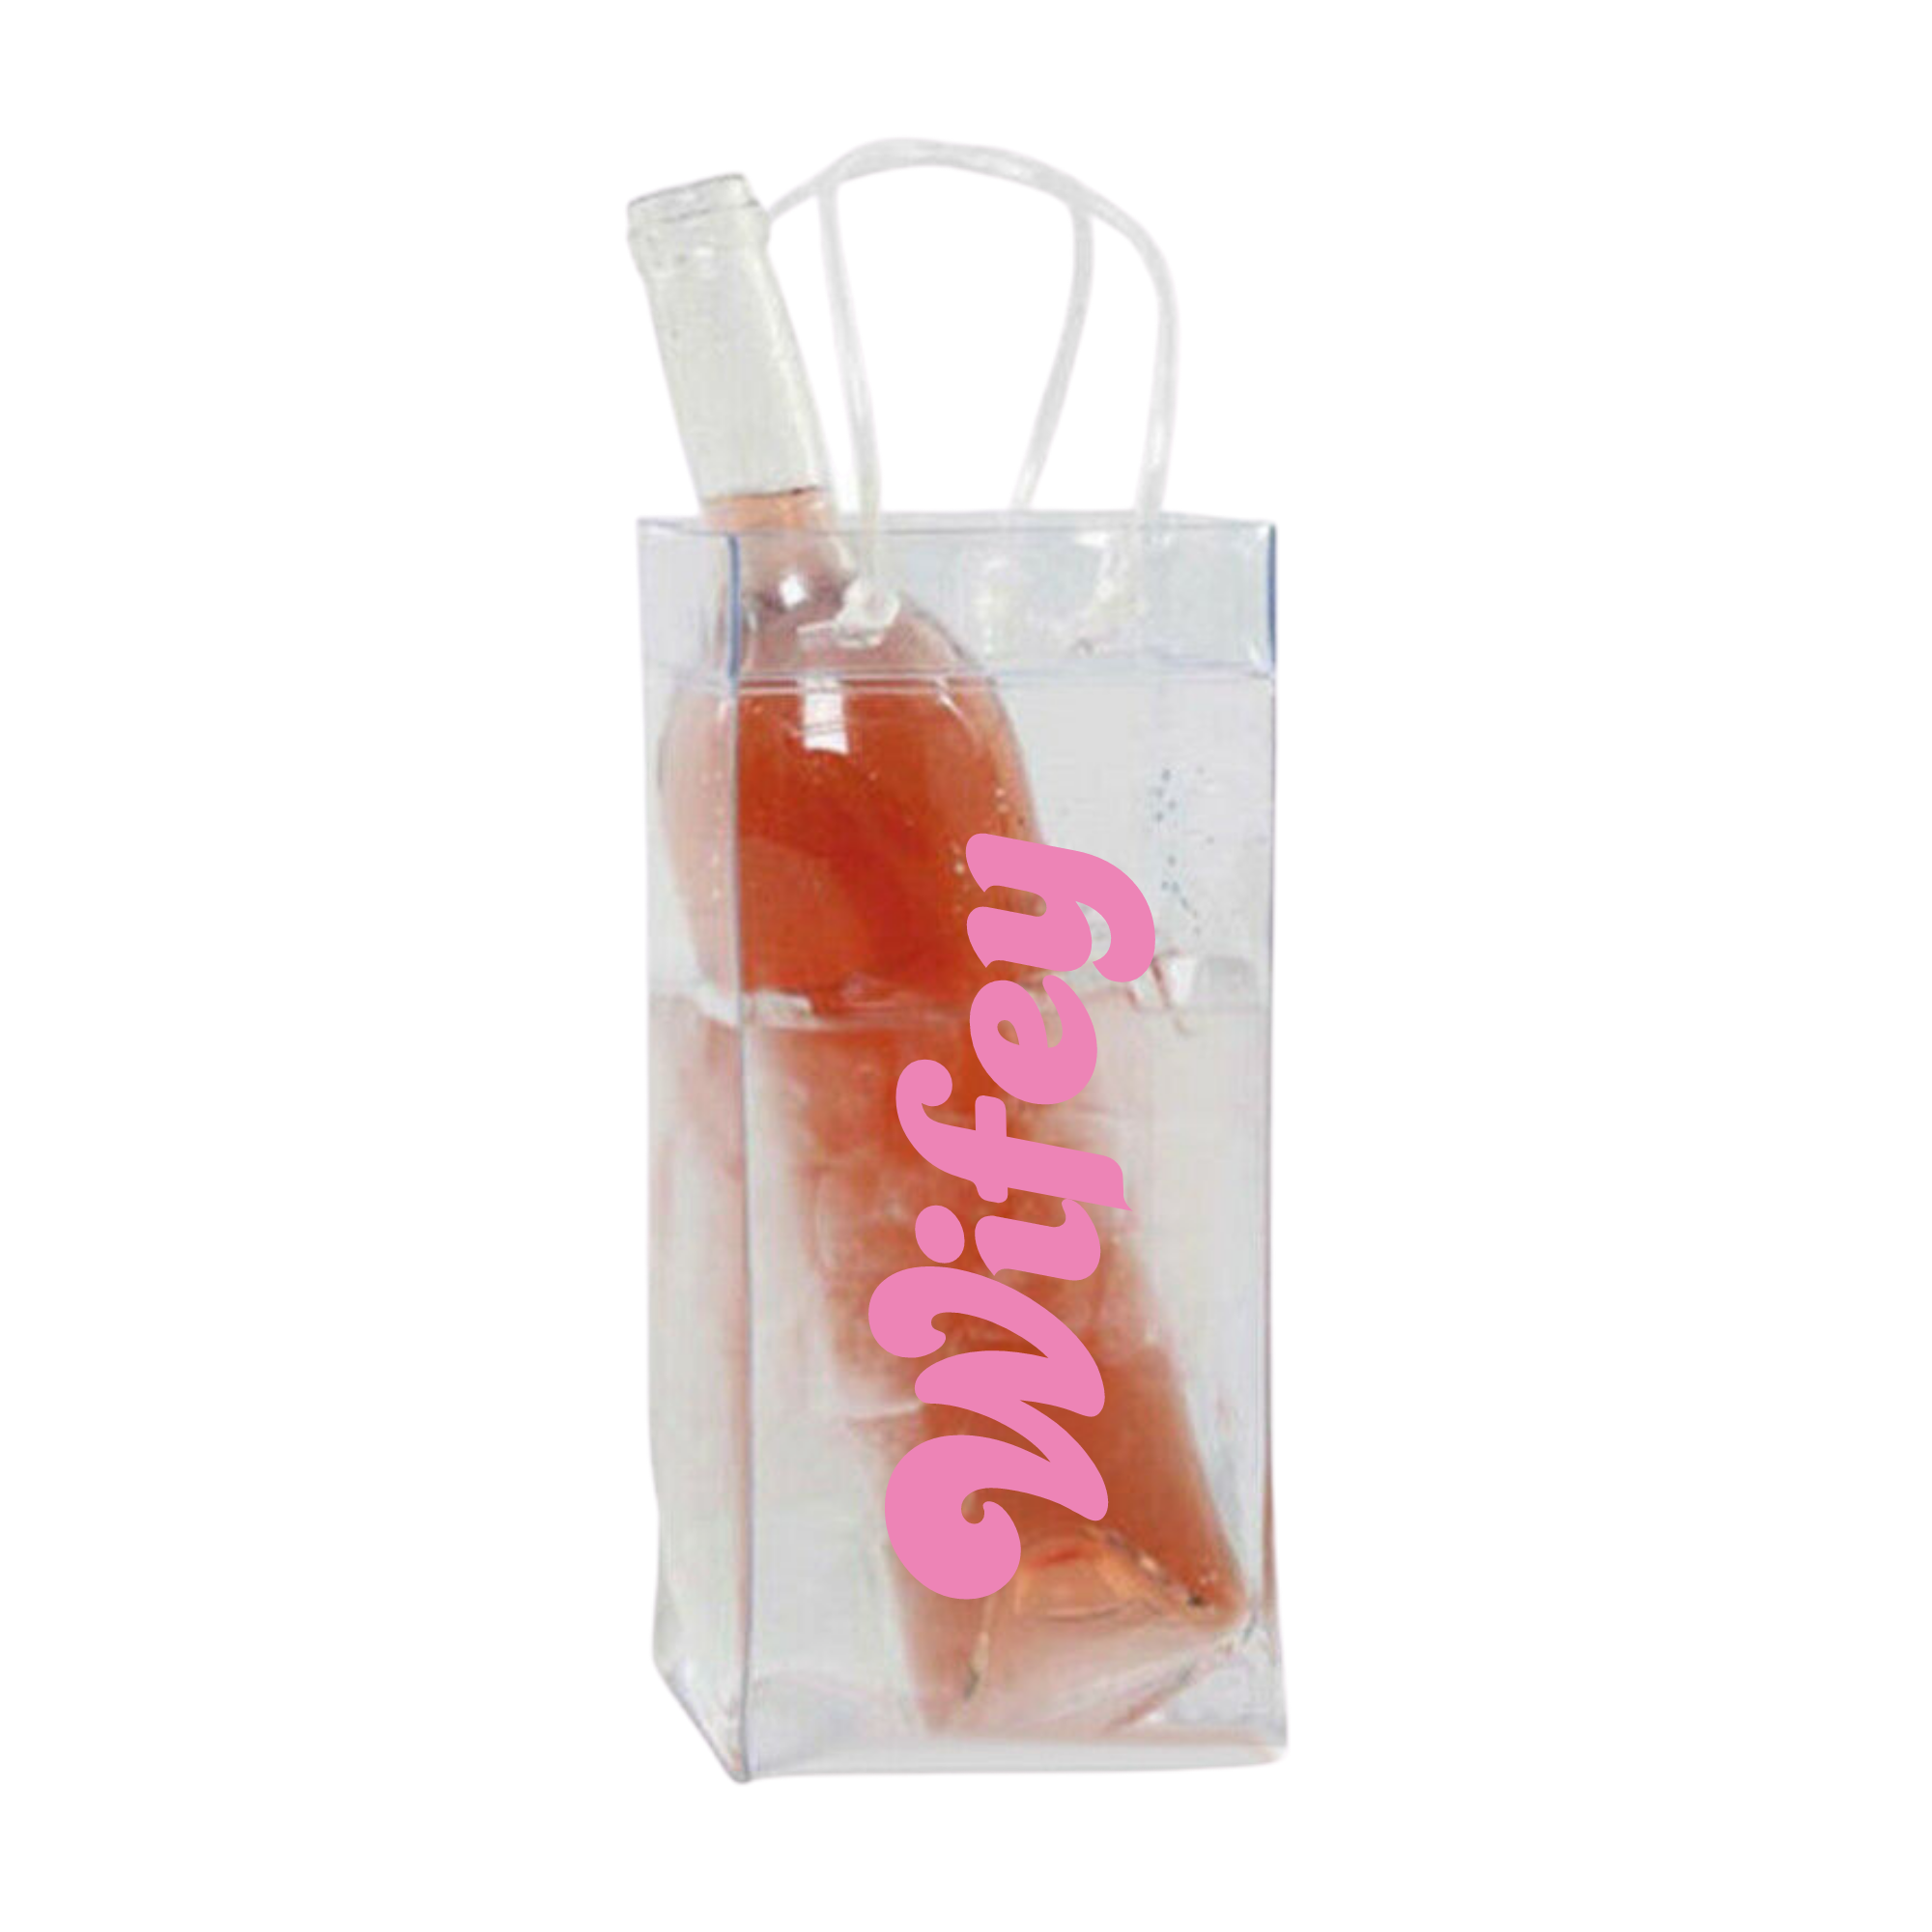 A clear wine bag that says "Wifey" in pink